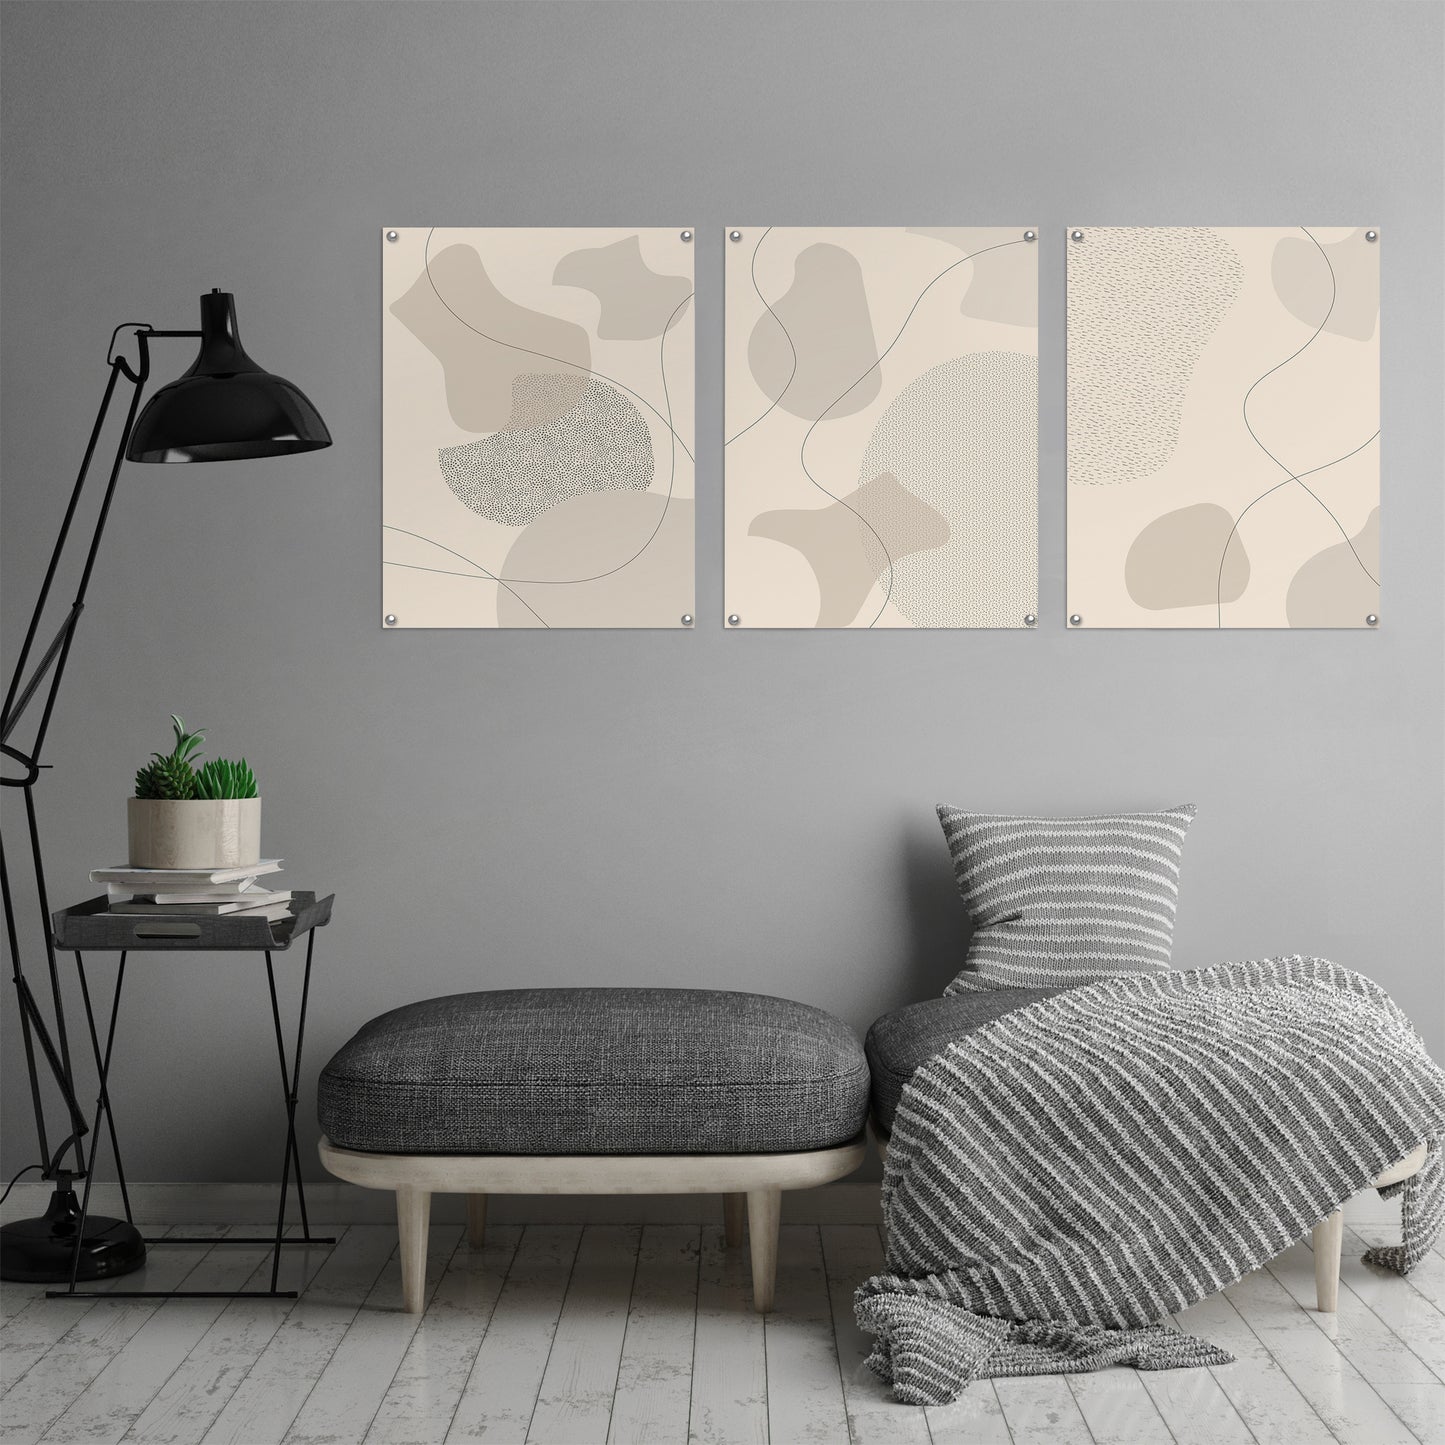 (Set of 3) Triptych Wall Art Abstract Neutrals by Melanie Viola - Poster Print